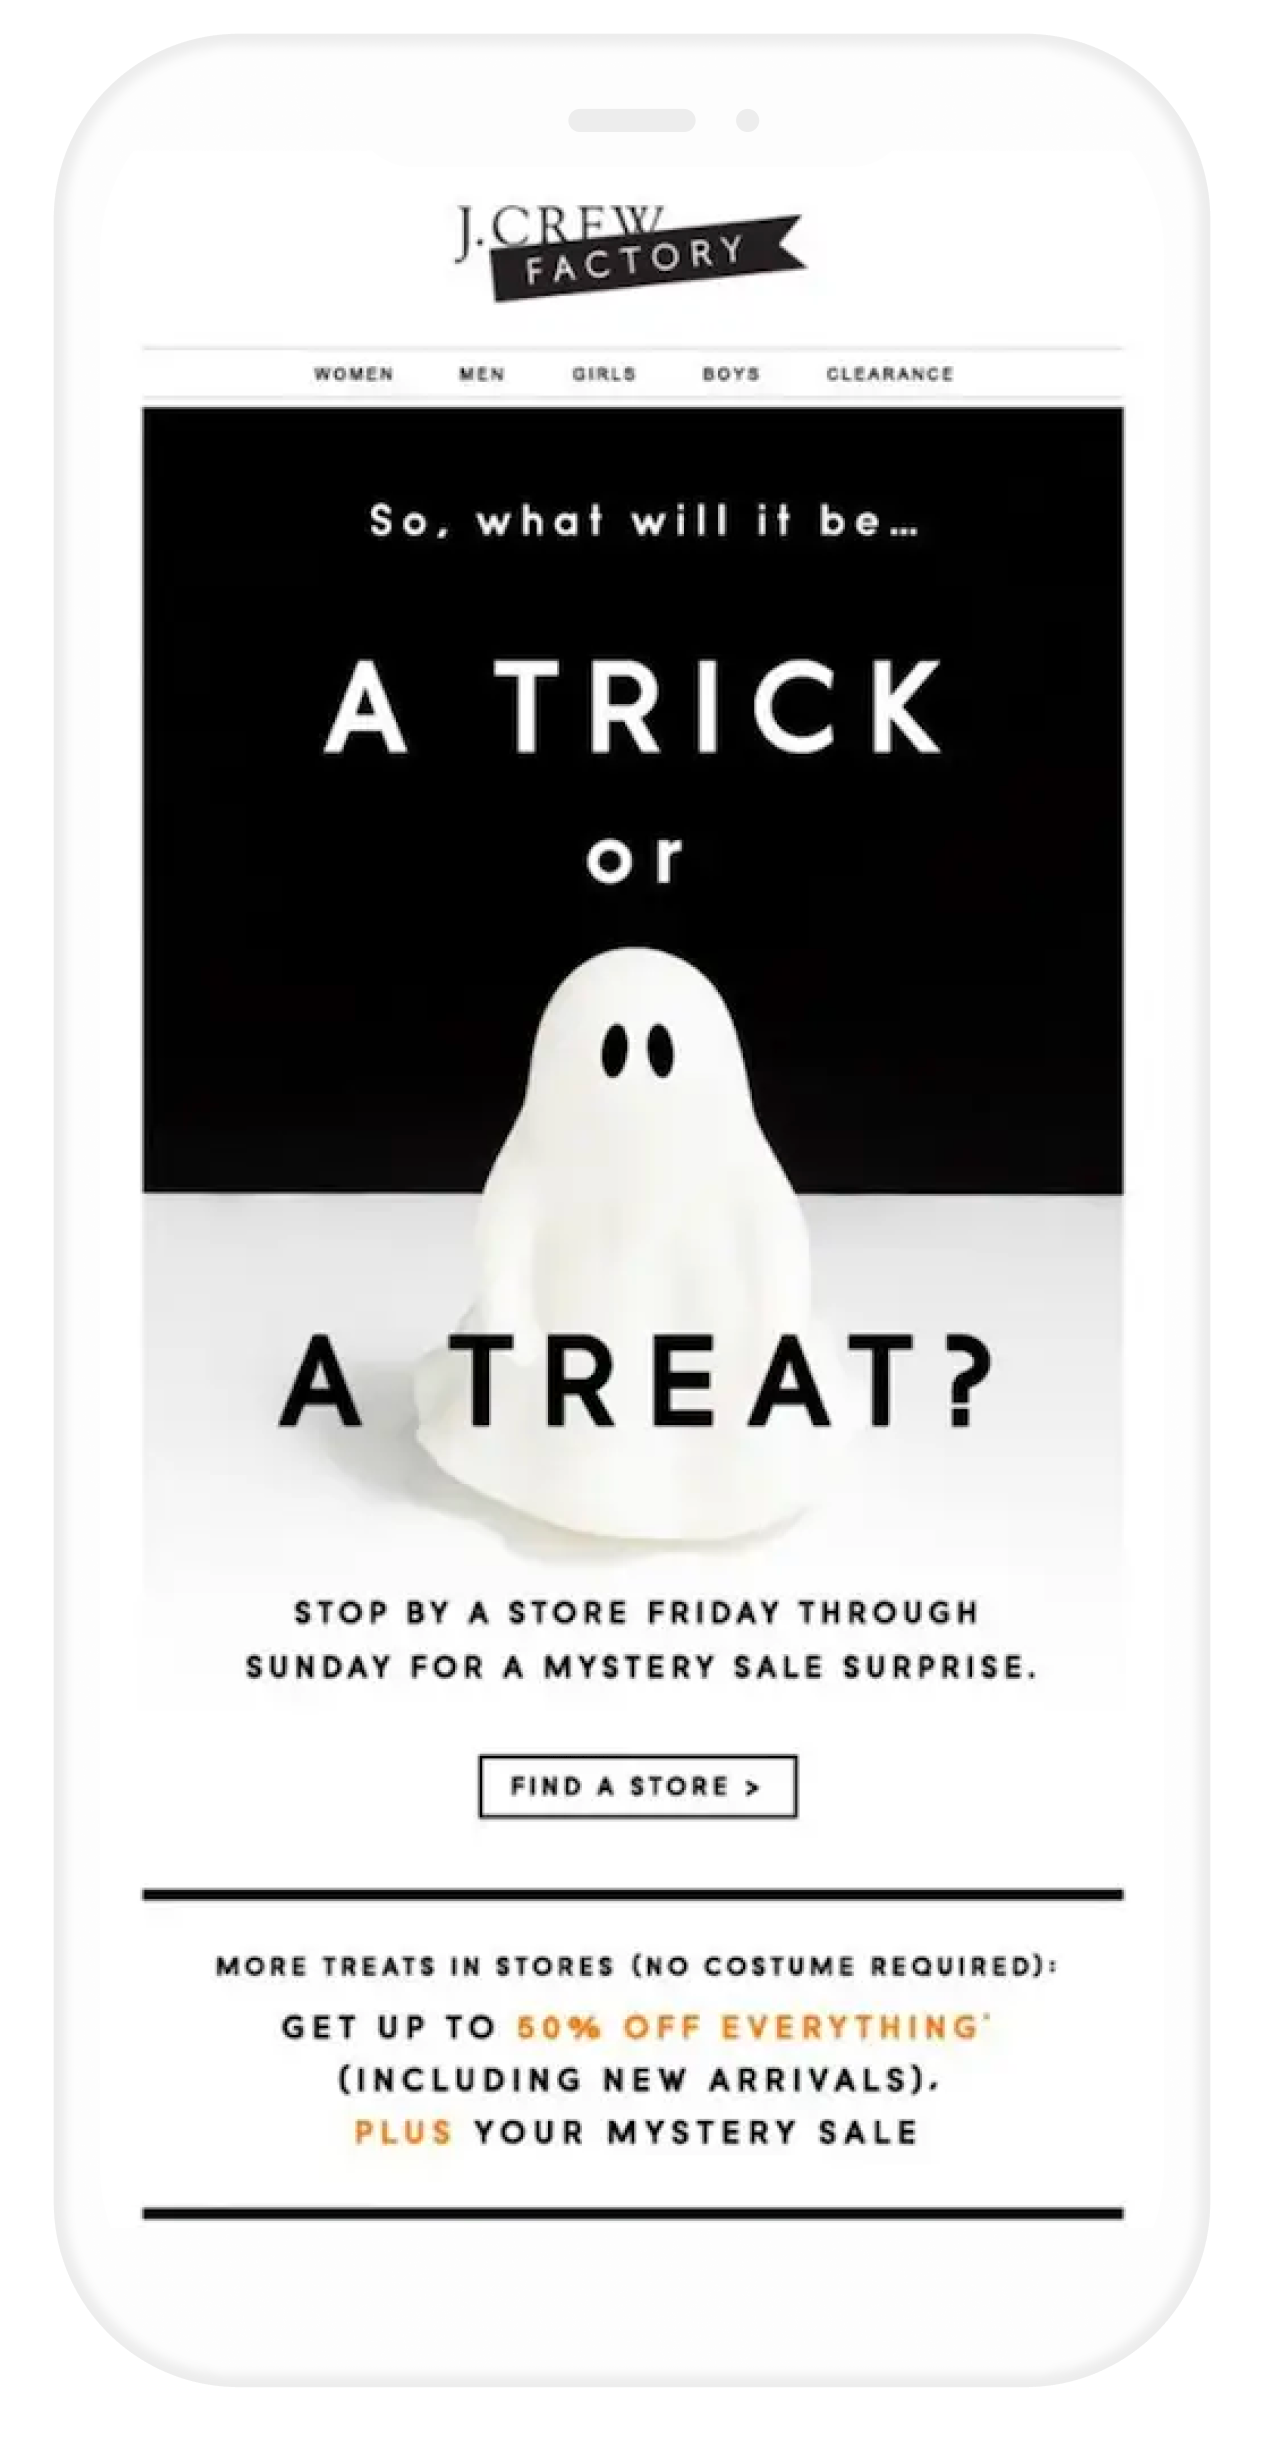 J. Crew email designed for Halloween.